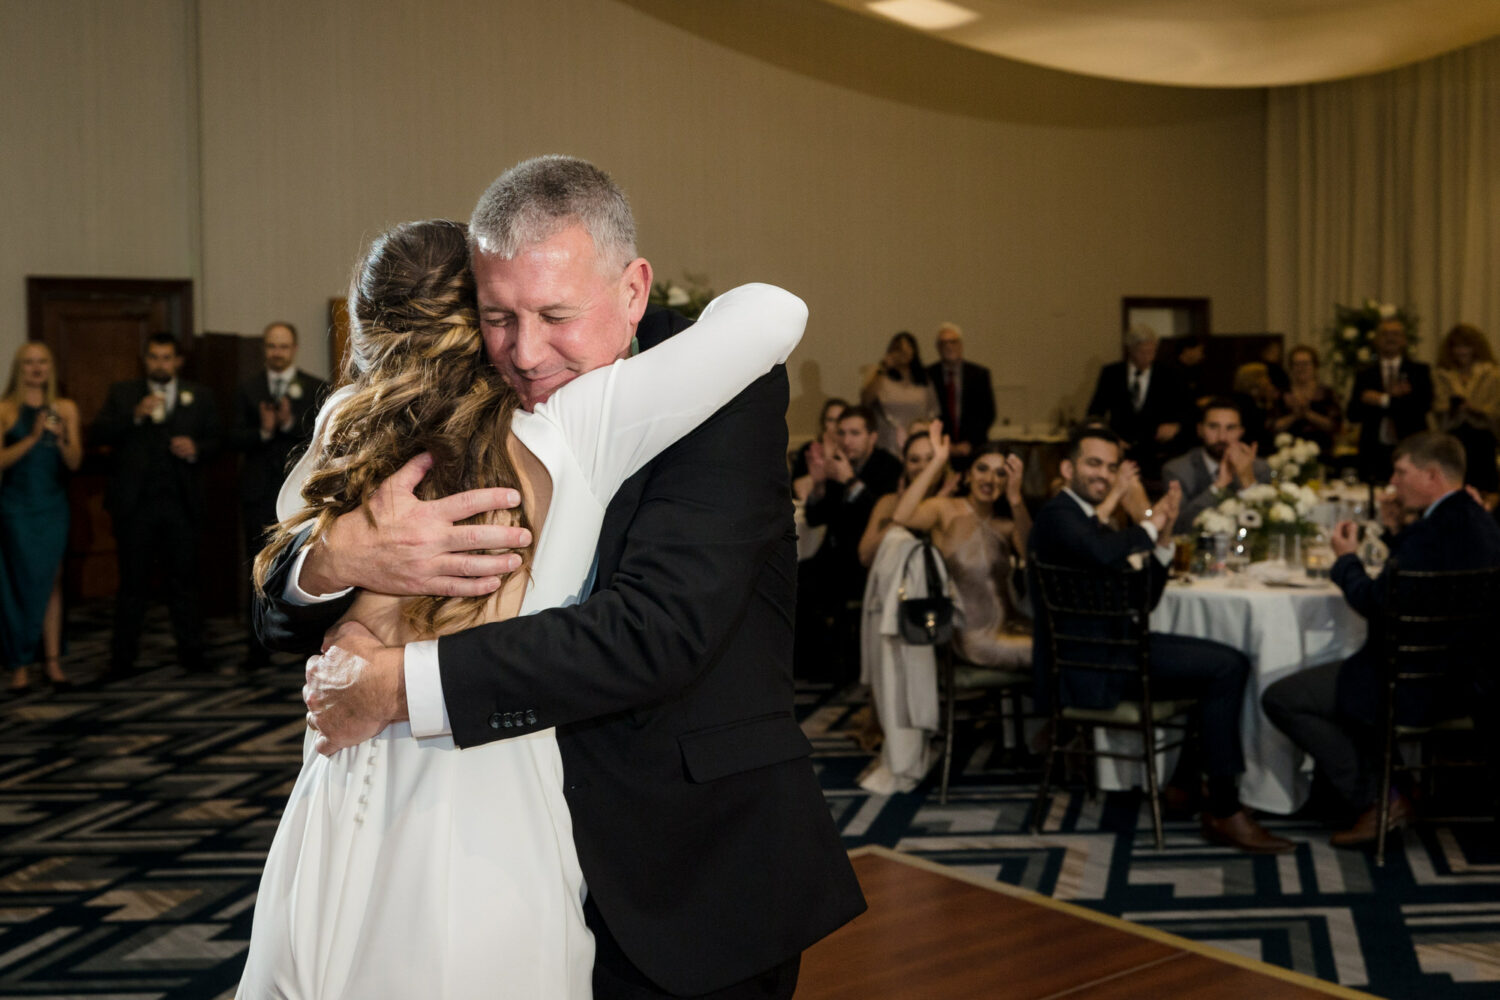 Dancing with the father of the bride at an indoor ballroom reception.